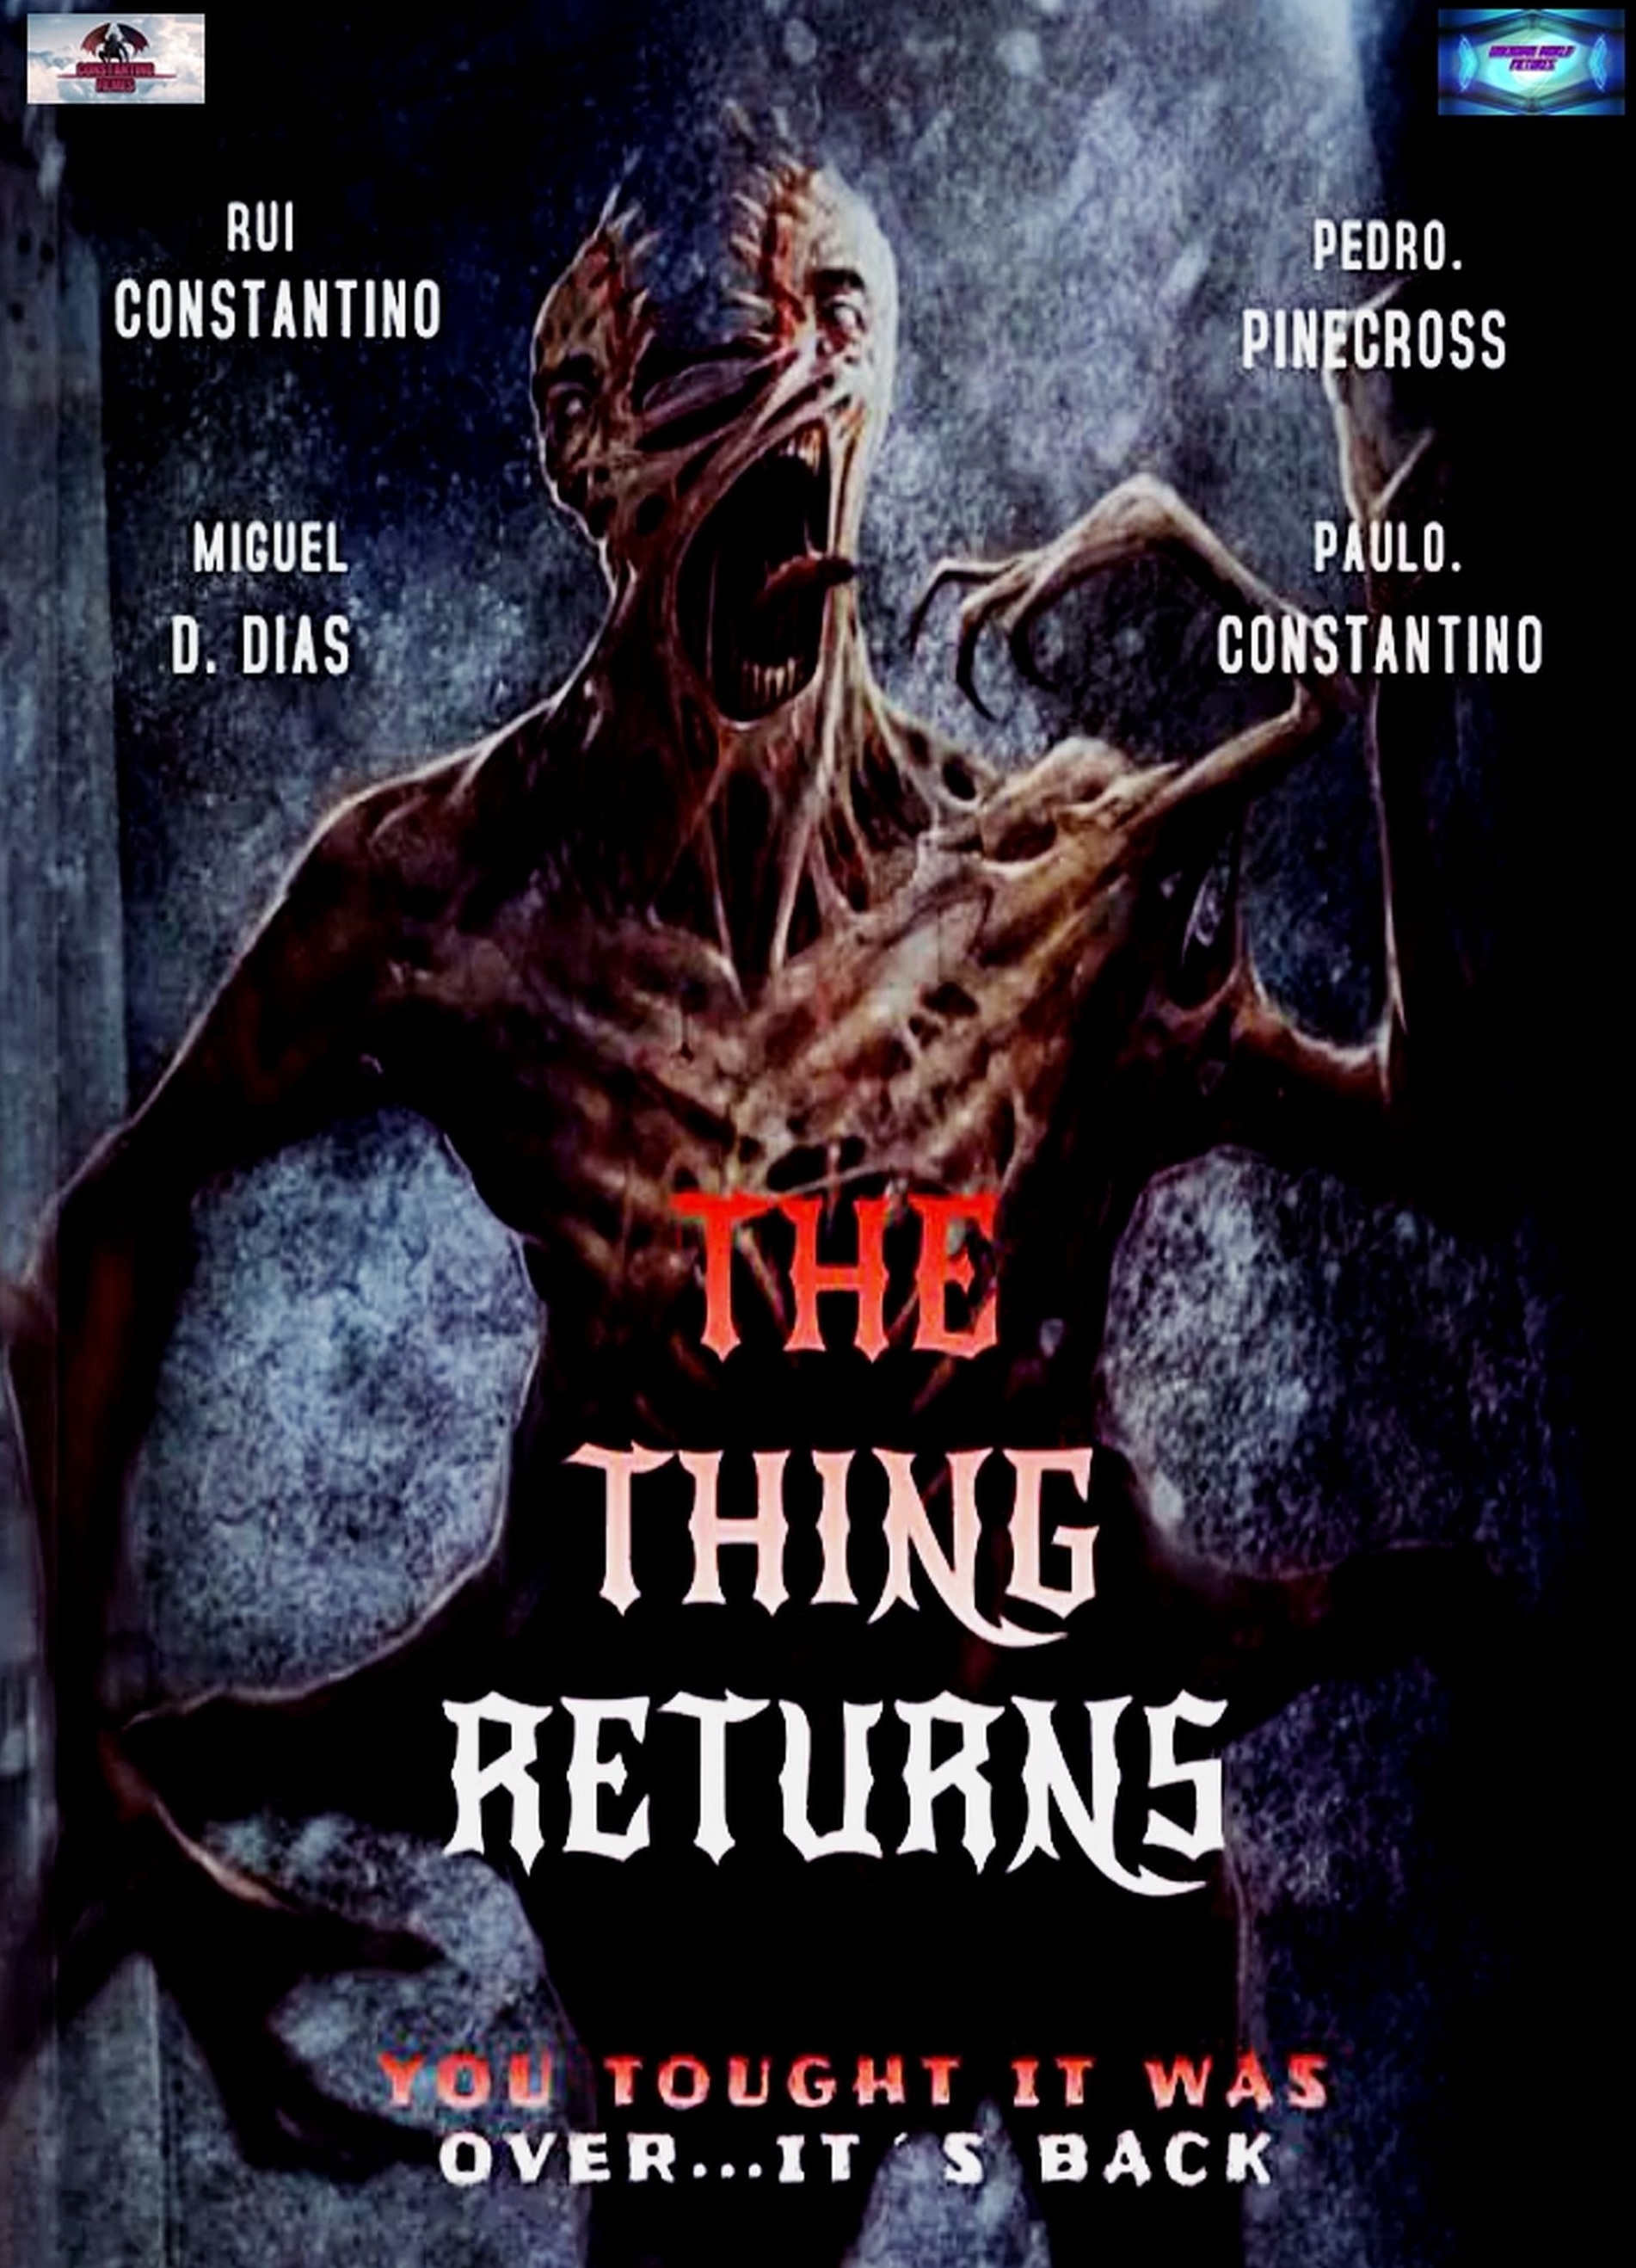 The Thing: O Regresso (2021)